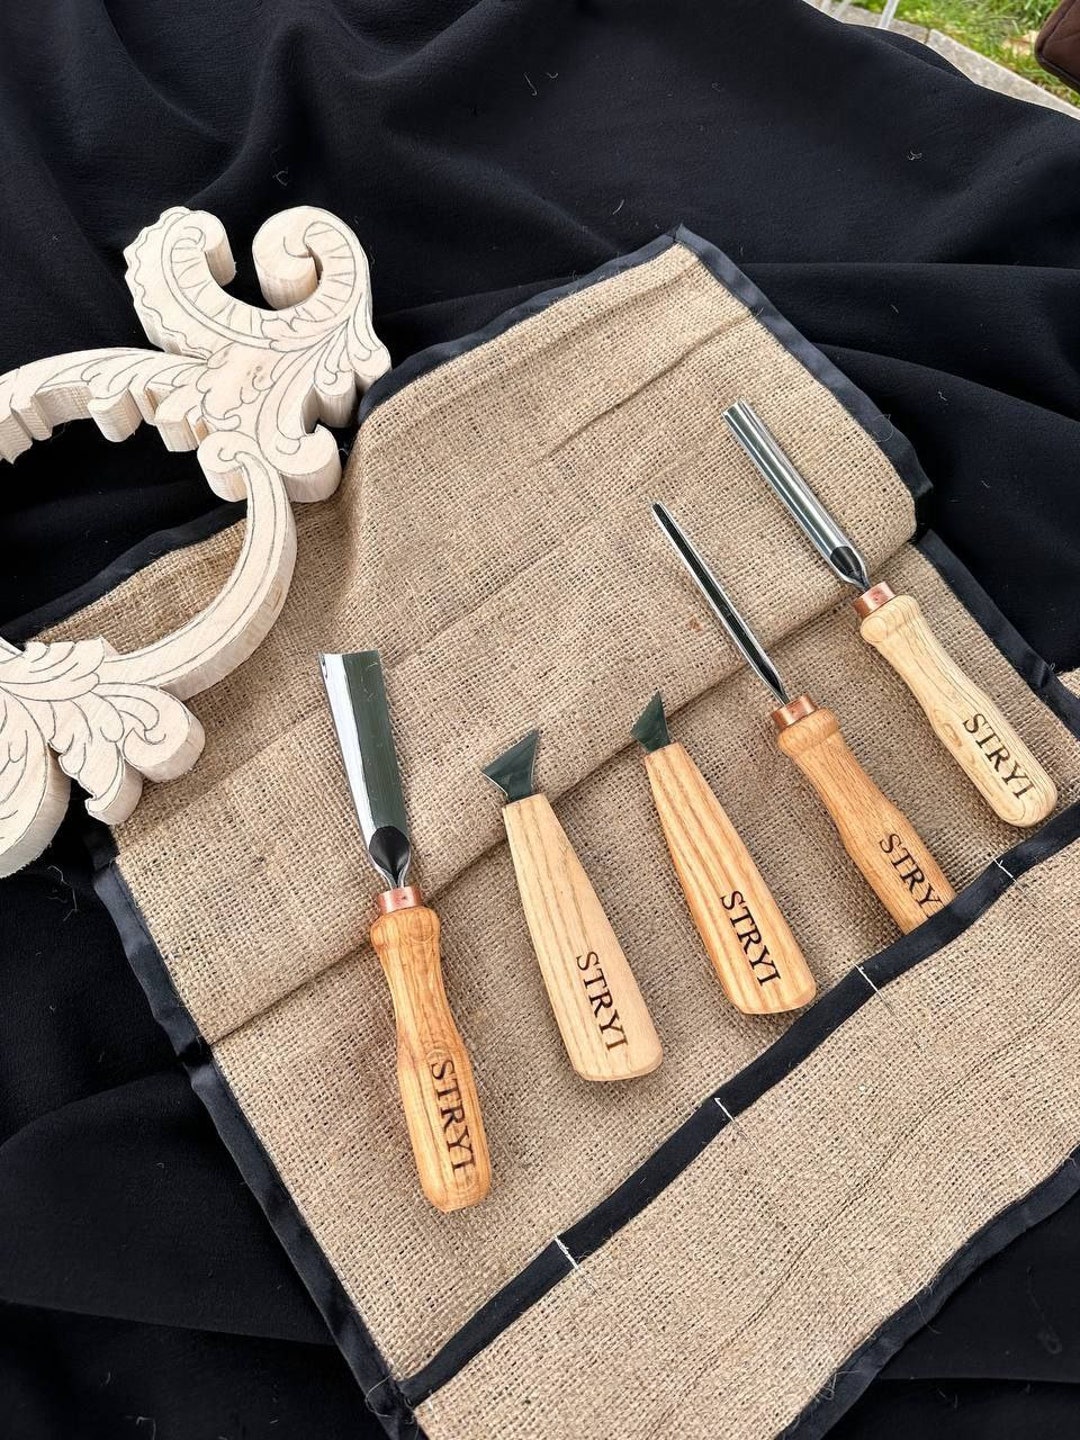 Wood Carving Set of 7 Tools for Chip Carving STRYI Profi